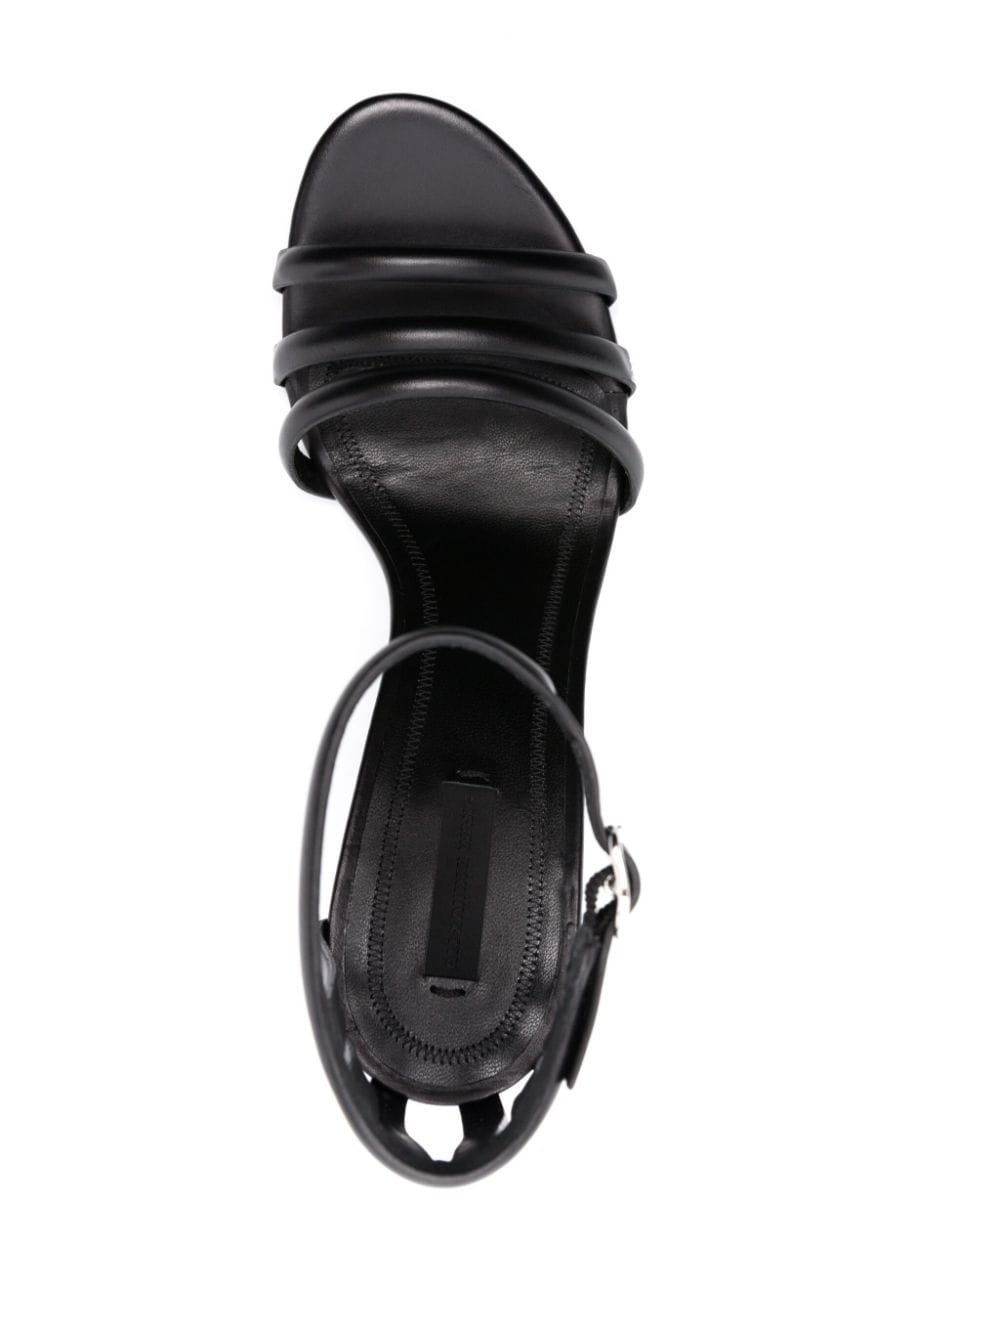 Pre-owned Alexander Wang Cage Abby 90mm Leather Sandals In Black